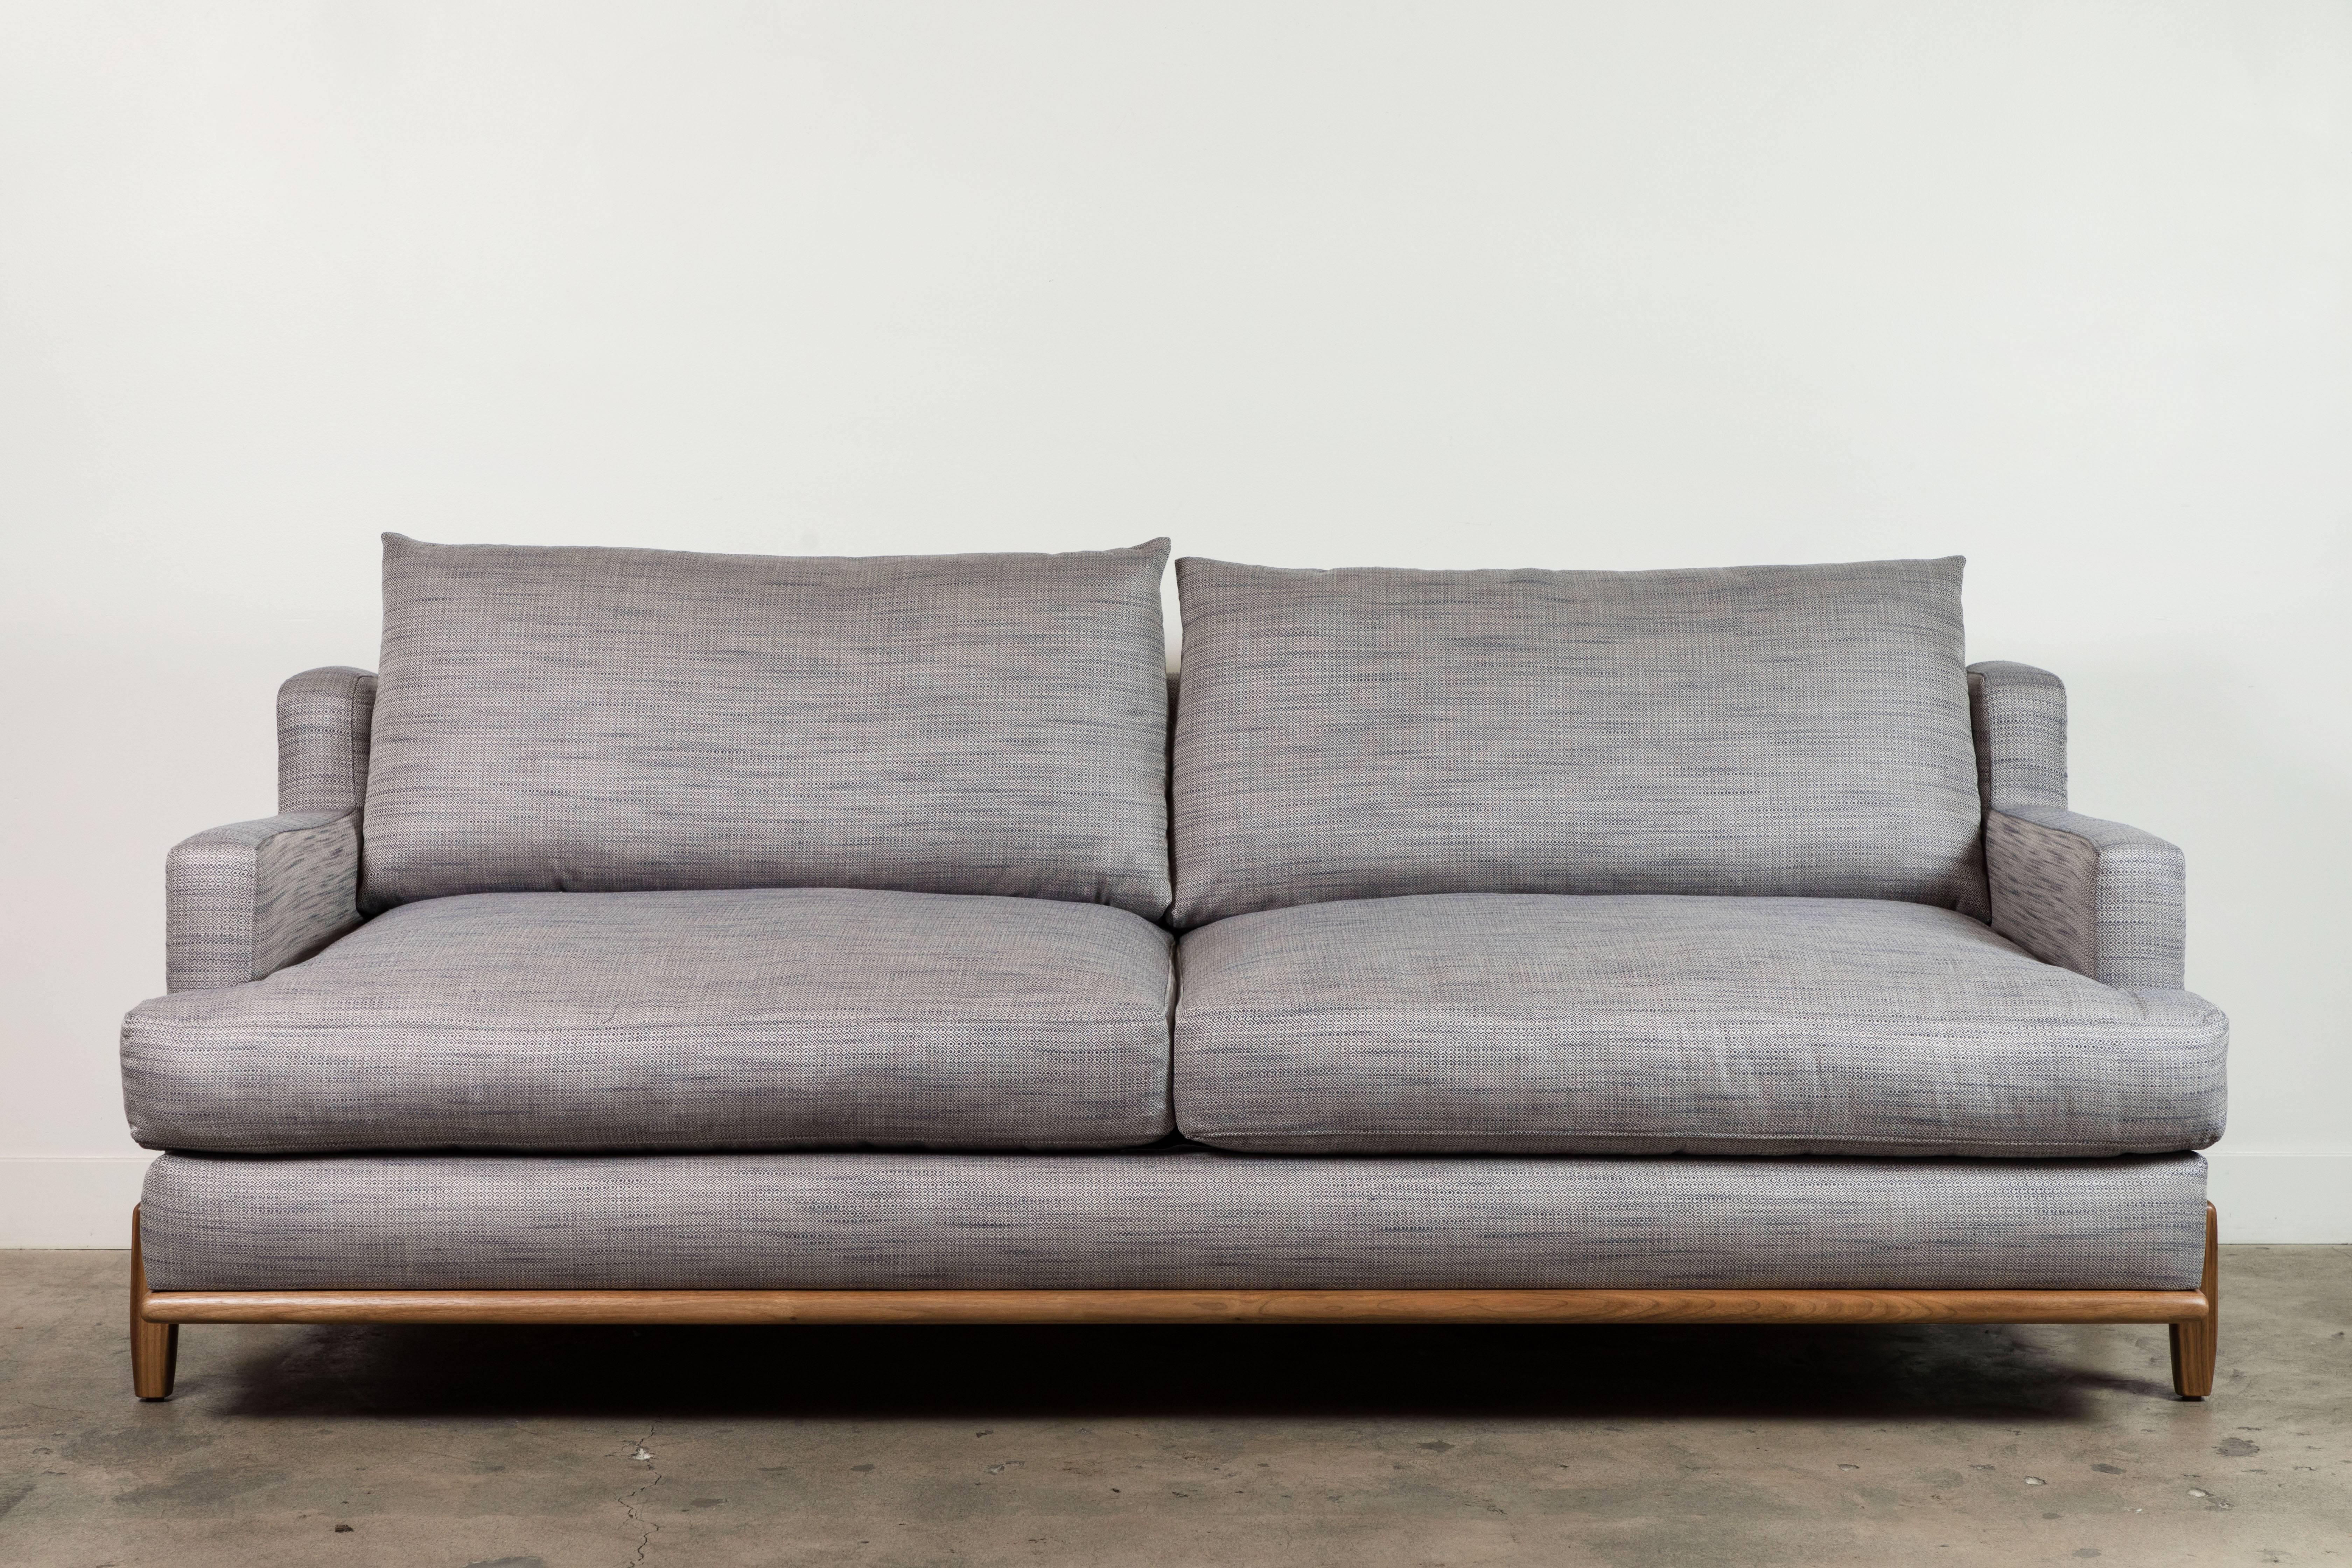 The George Sofa is part of the collaborative collection with interior designer Brian Paquette. The low profile silhouette sits above a sculpted solid wood base. This piece is available in exclusive BP for LF finishes as well as the standard